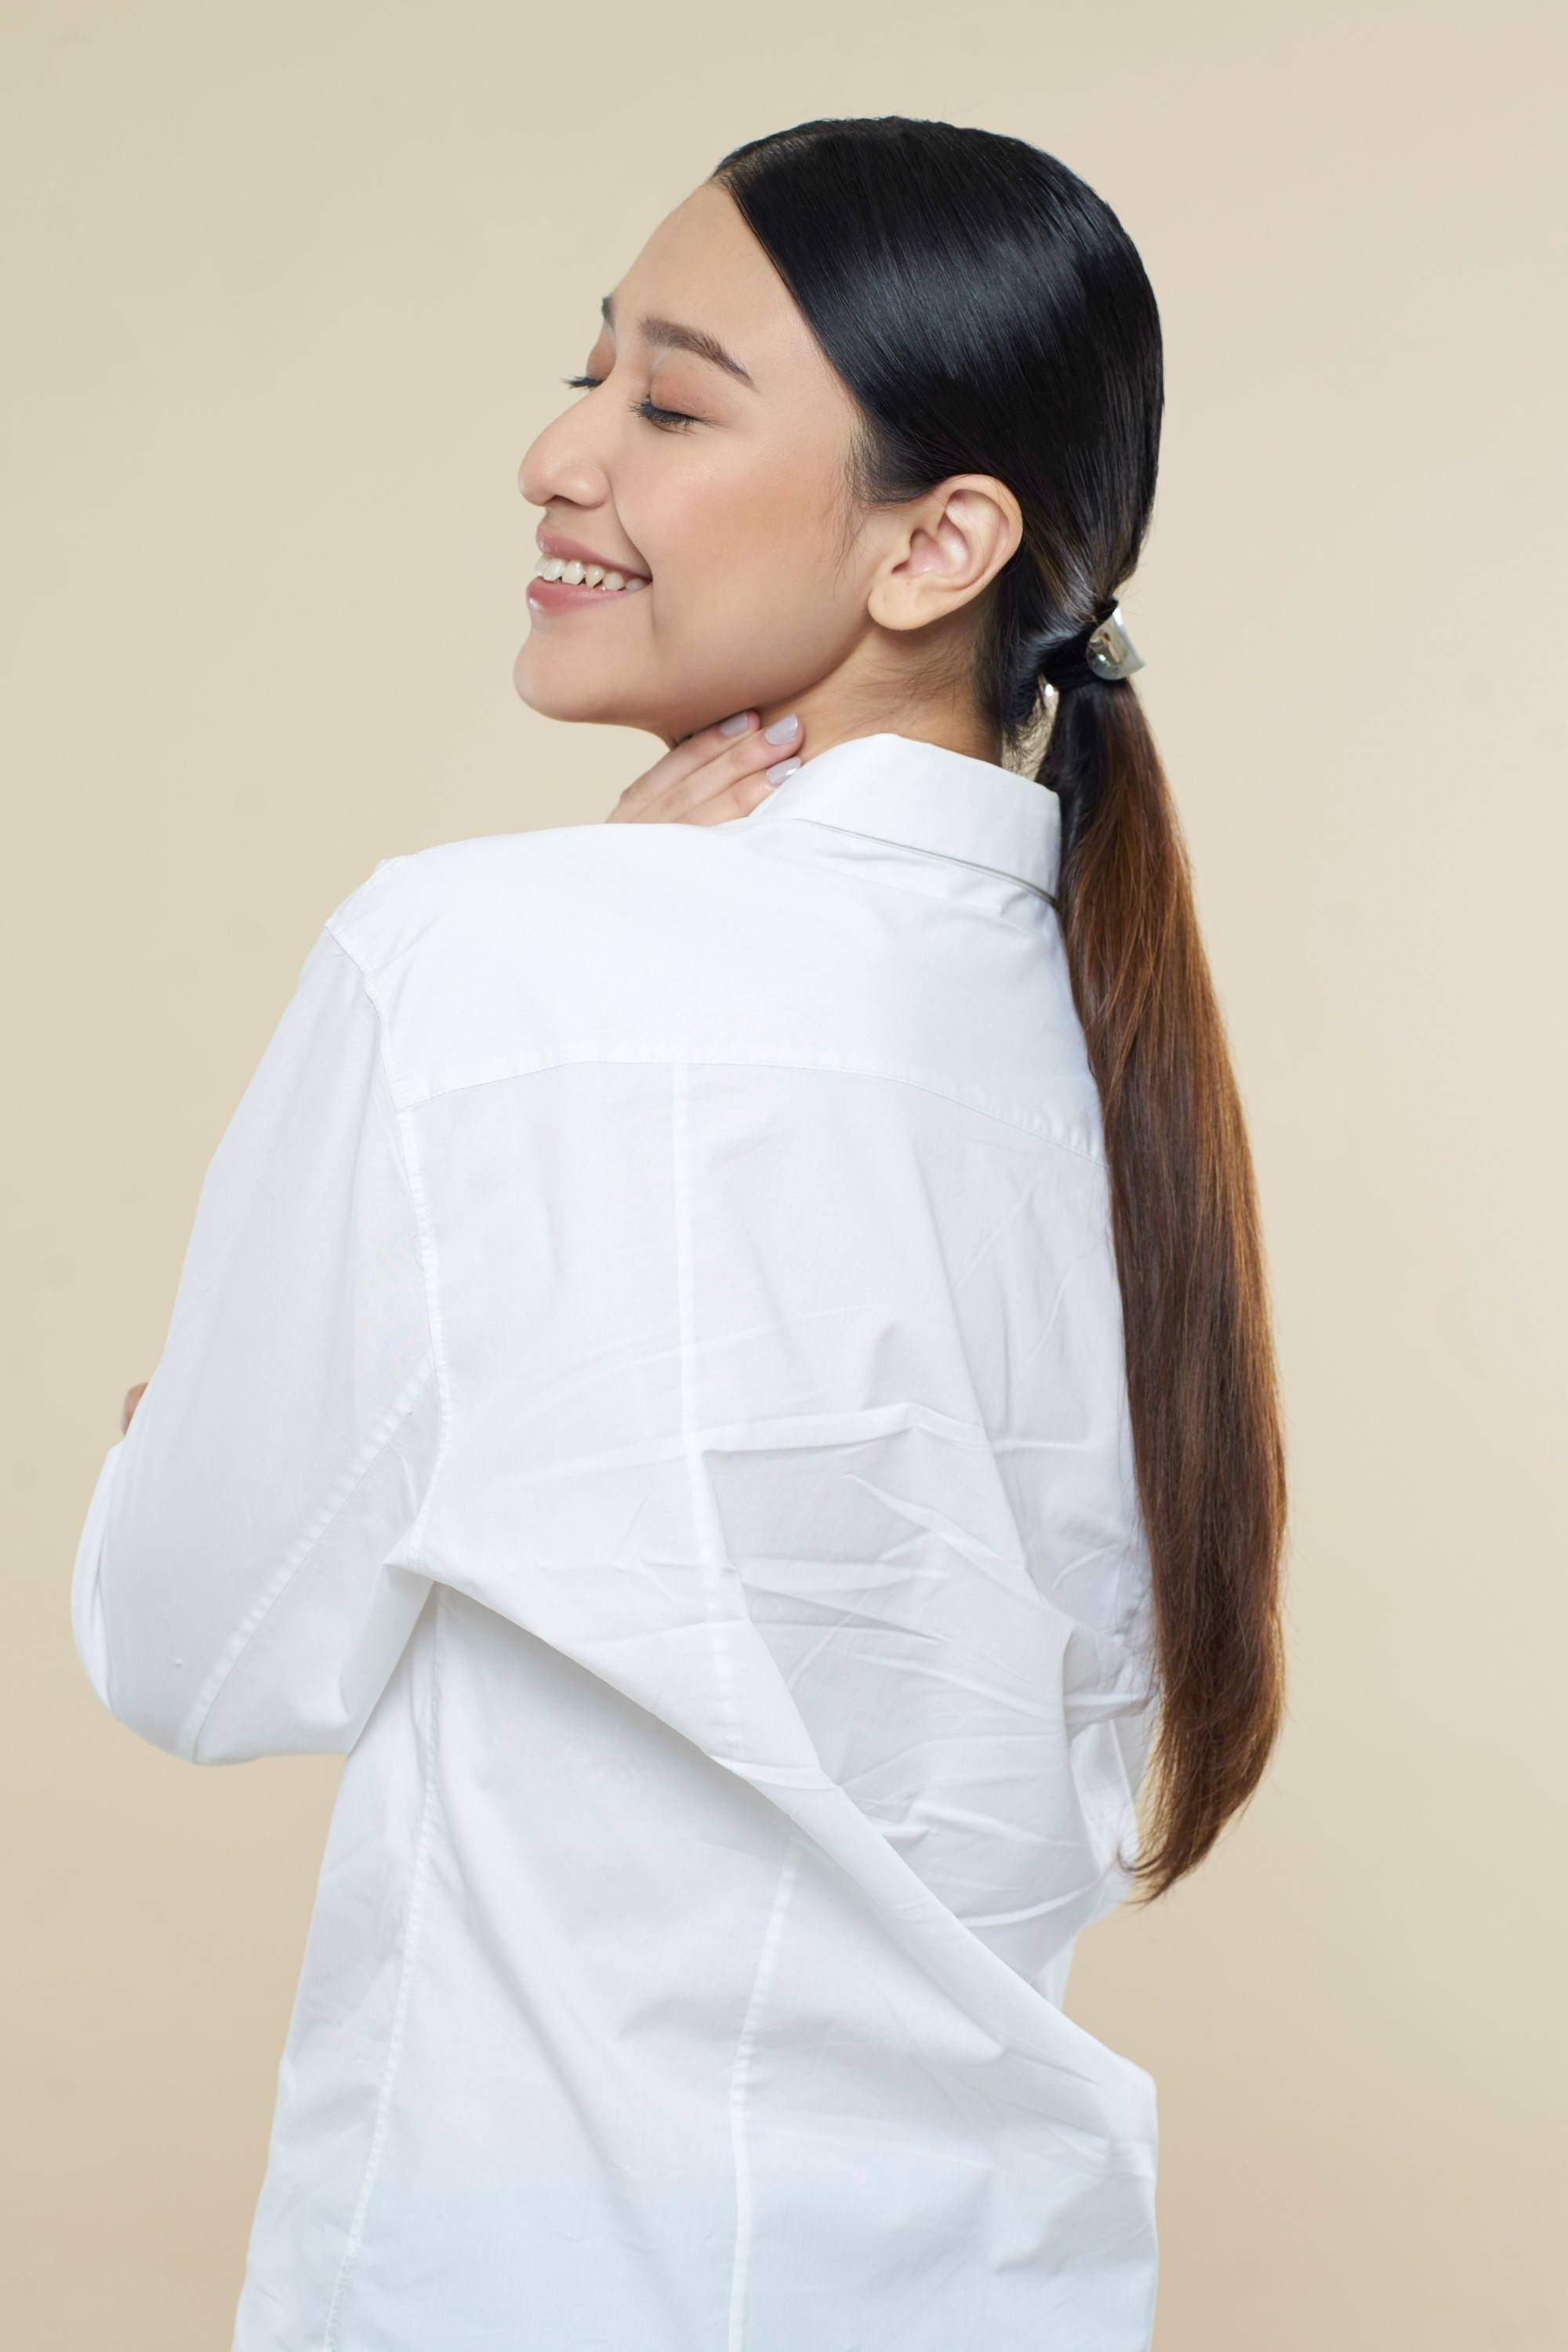 Sleek tied hair: Side view of an Asian woman with long dark hair in low ponytail wearing a white blouse